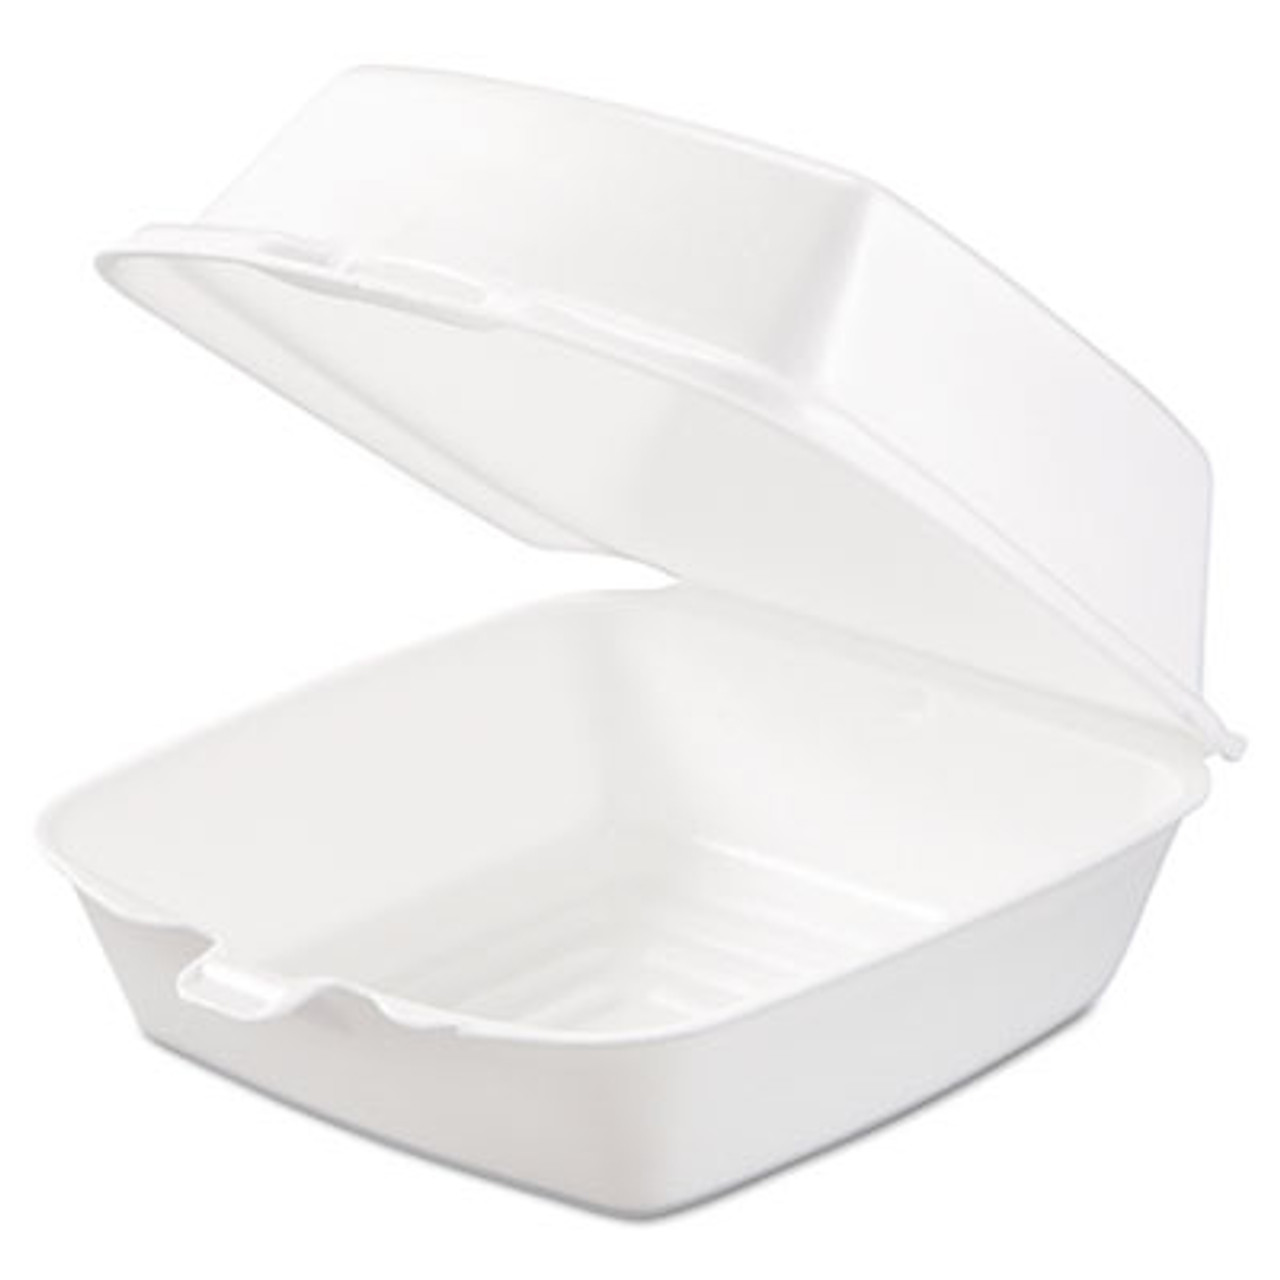 CARRYOUT (10 PIECES)(SERVE) FOOD FOAM-TRAYS FOR HOT & COLD FOODS(5